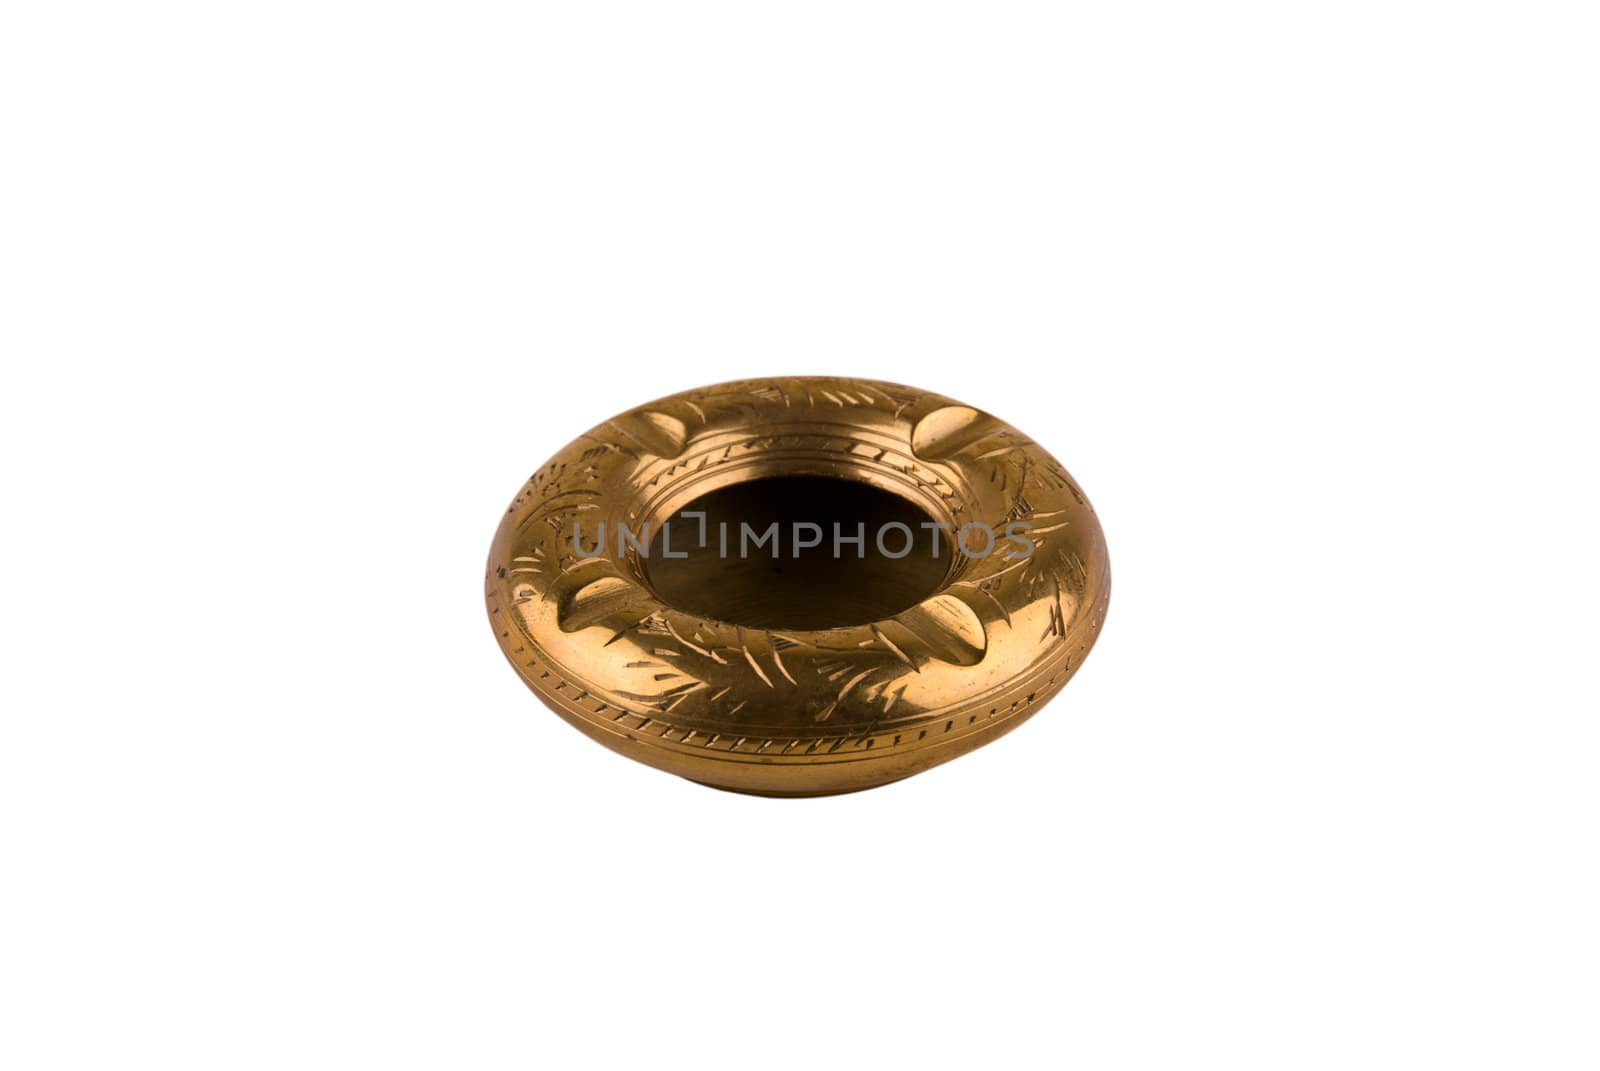 Traditional arab ash tray on white background